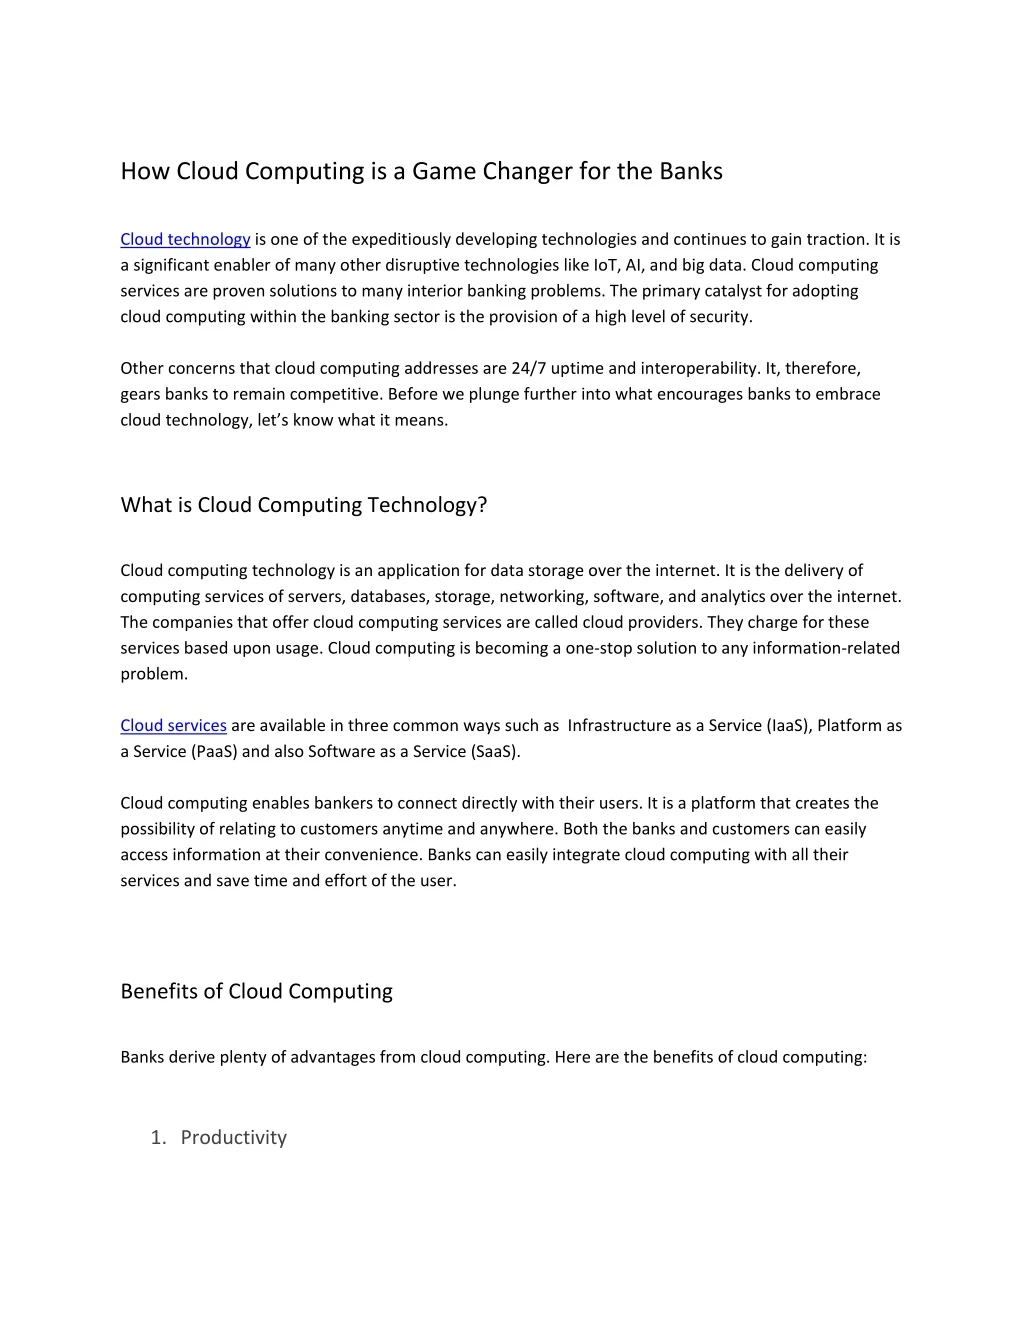 how cloud computing is a game changer